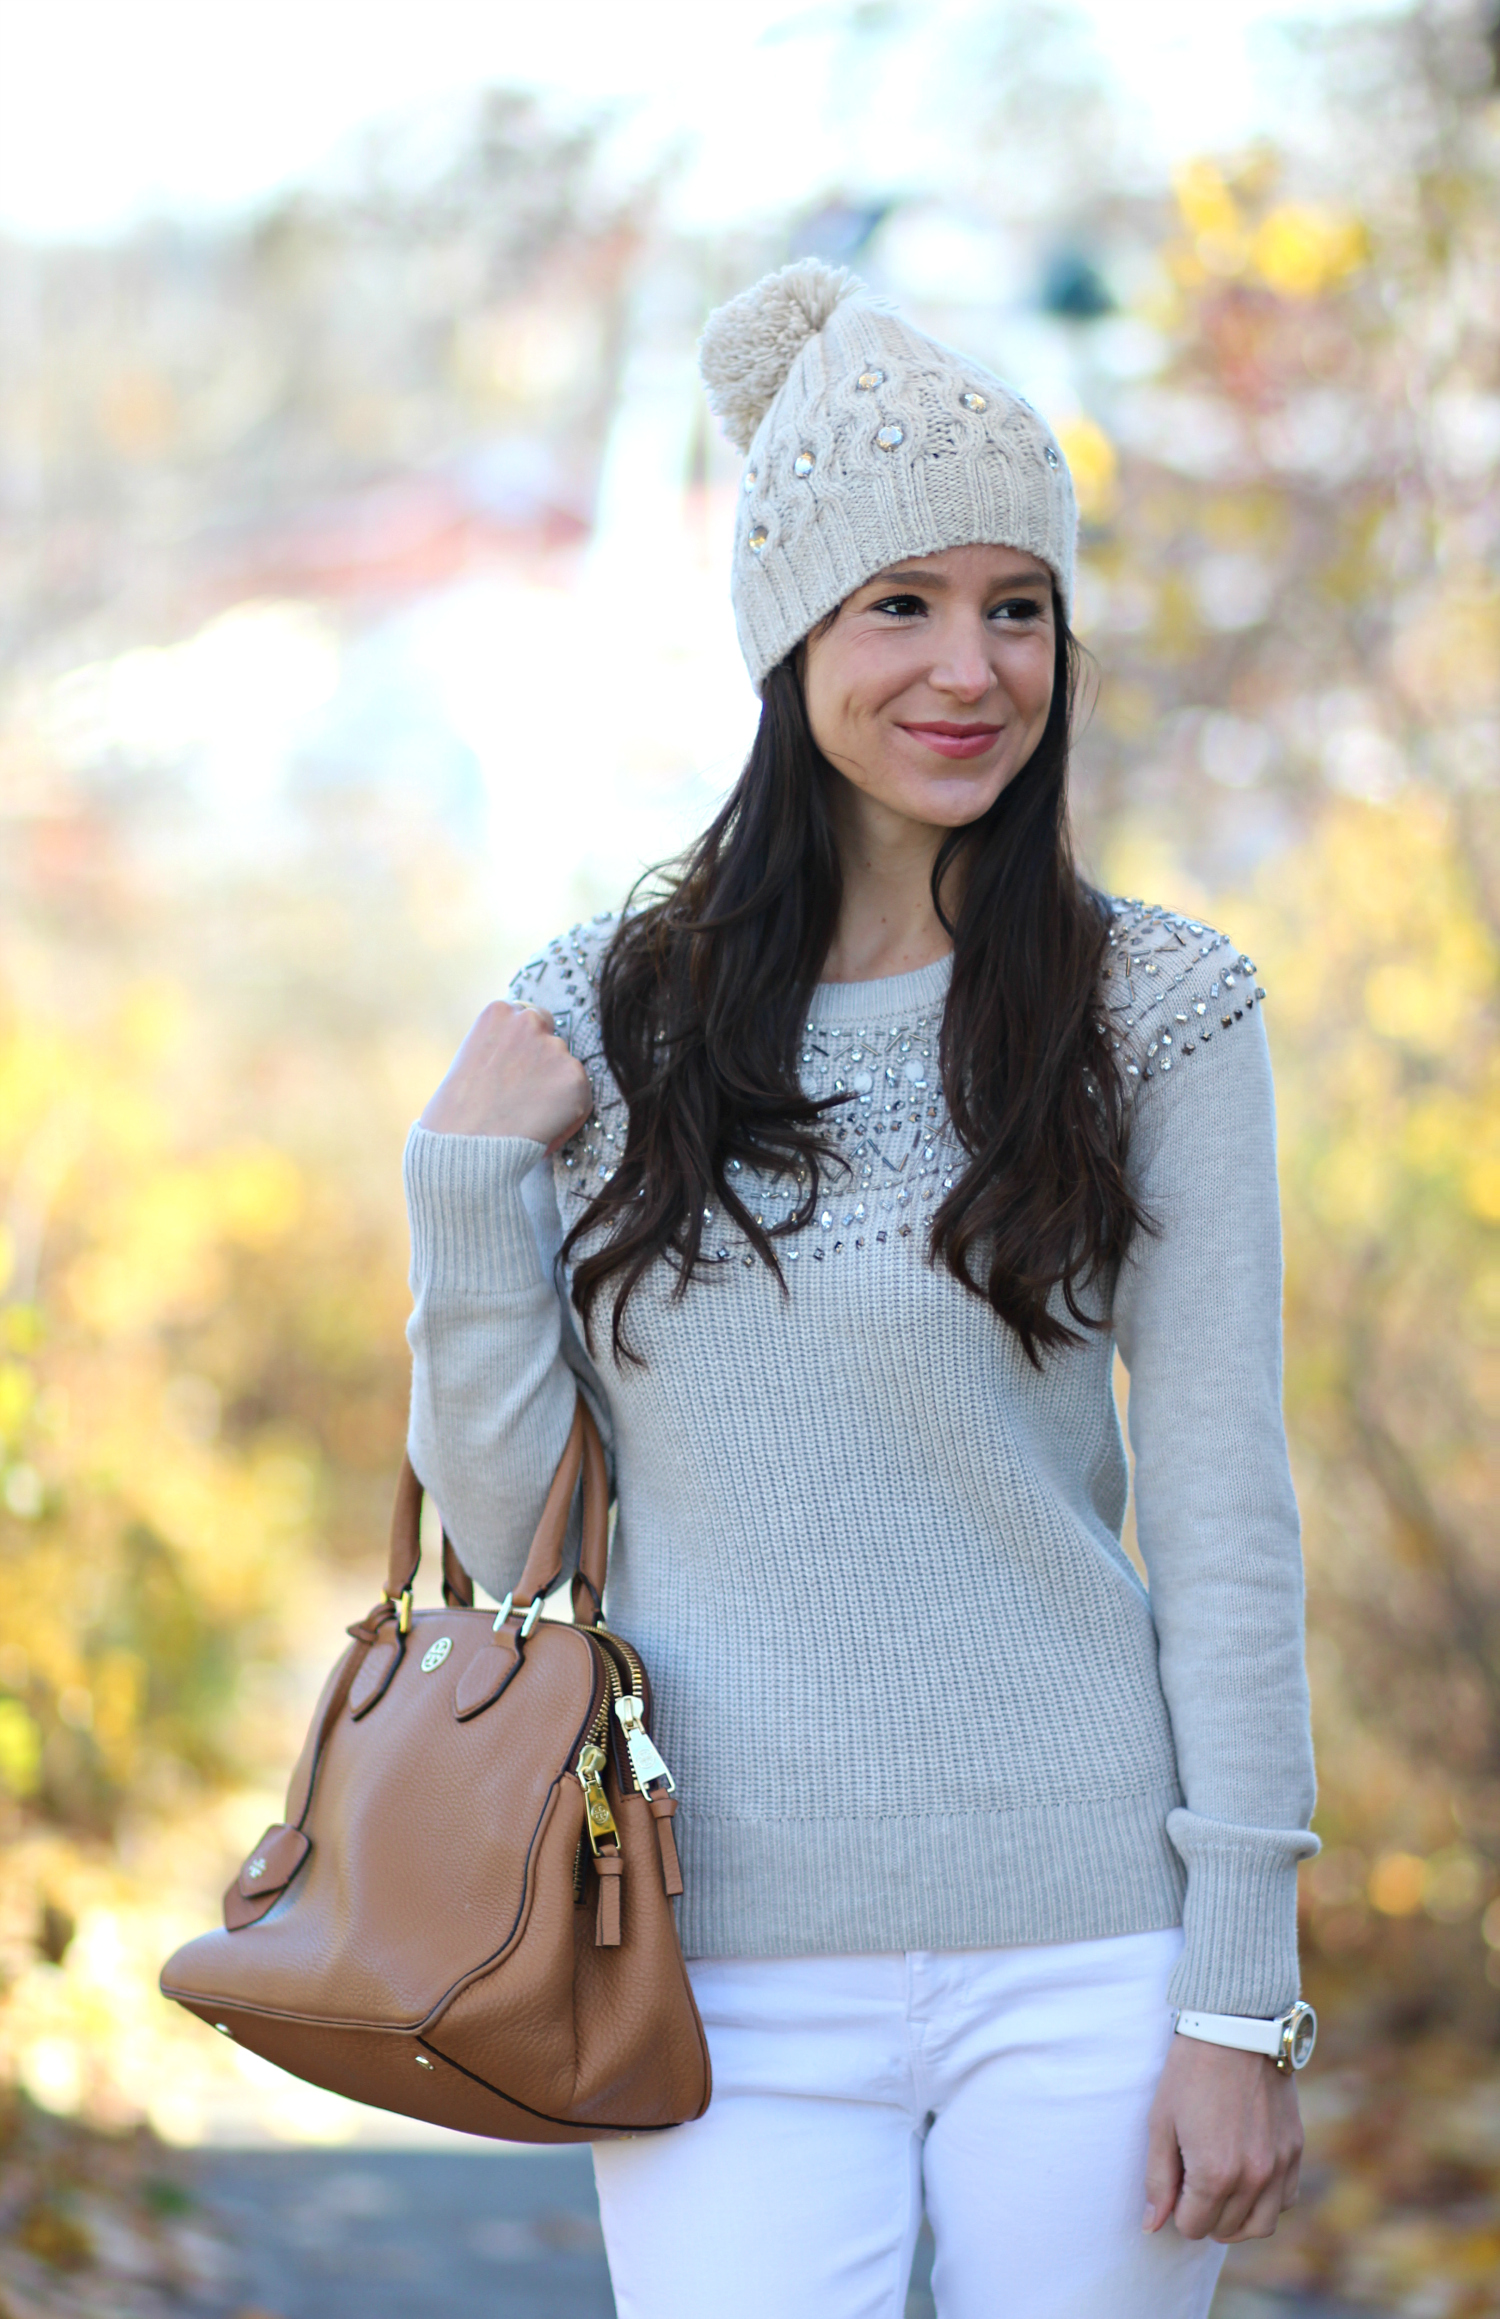 Festive and classy sweater outfit from Banana Republic